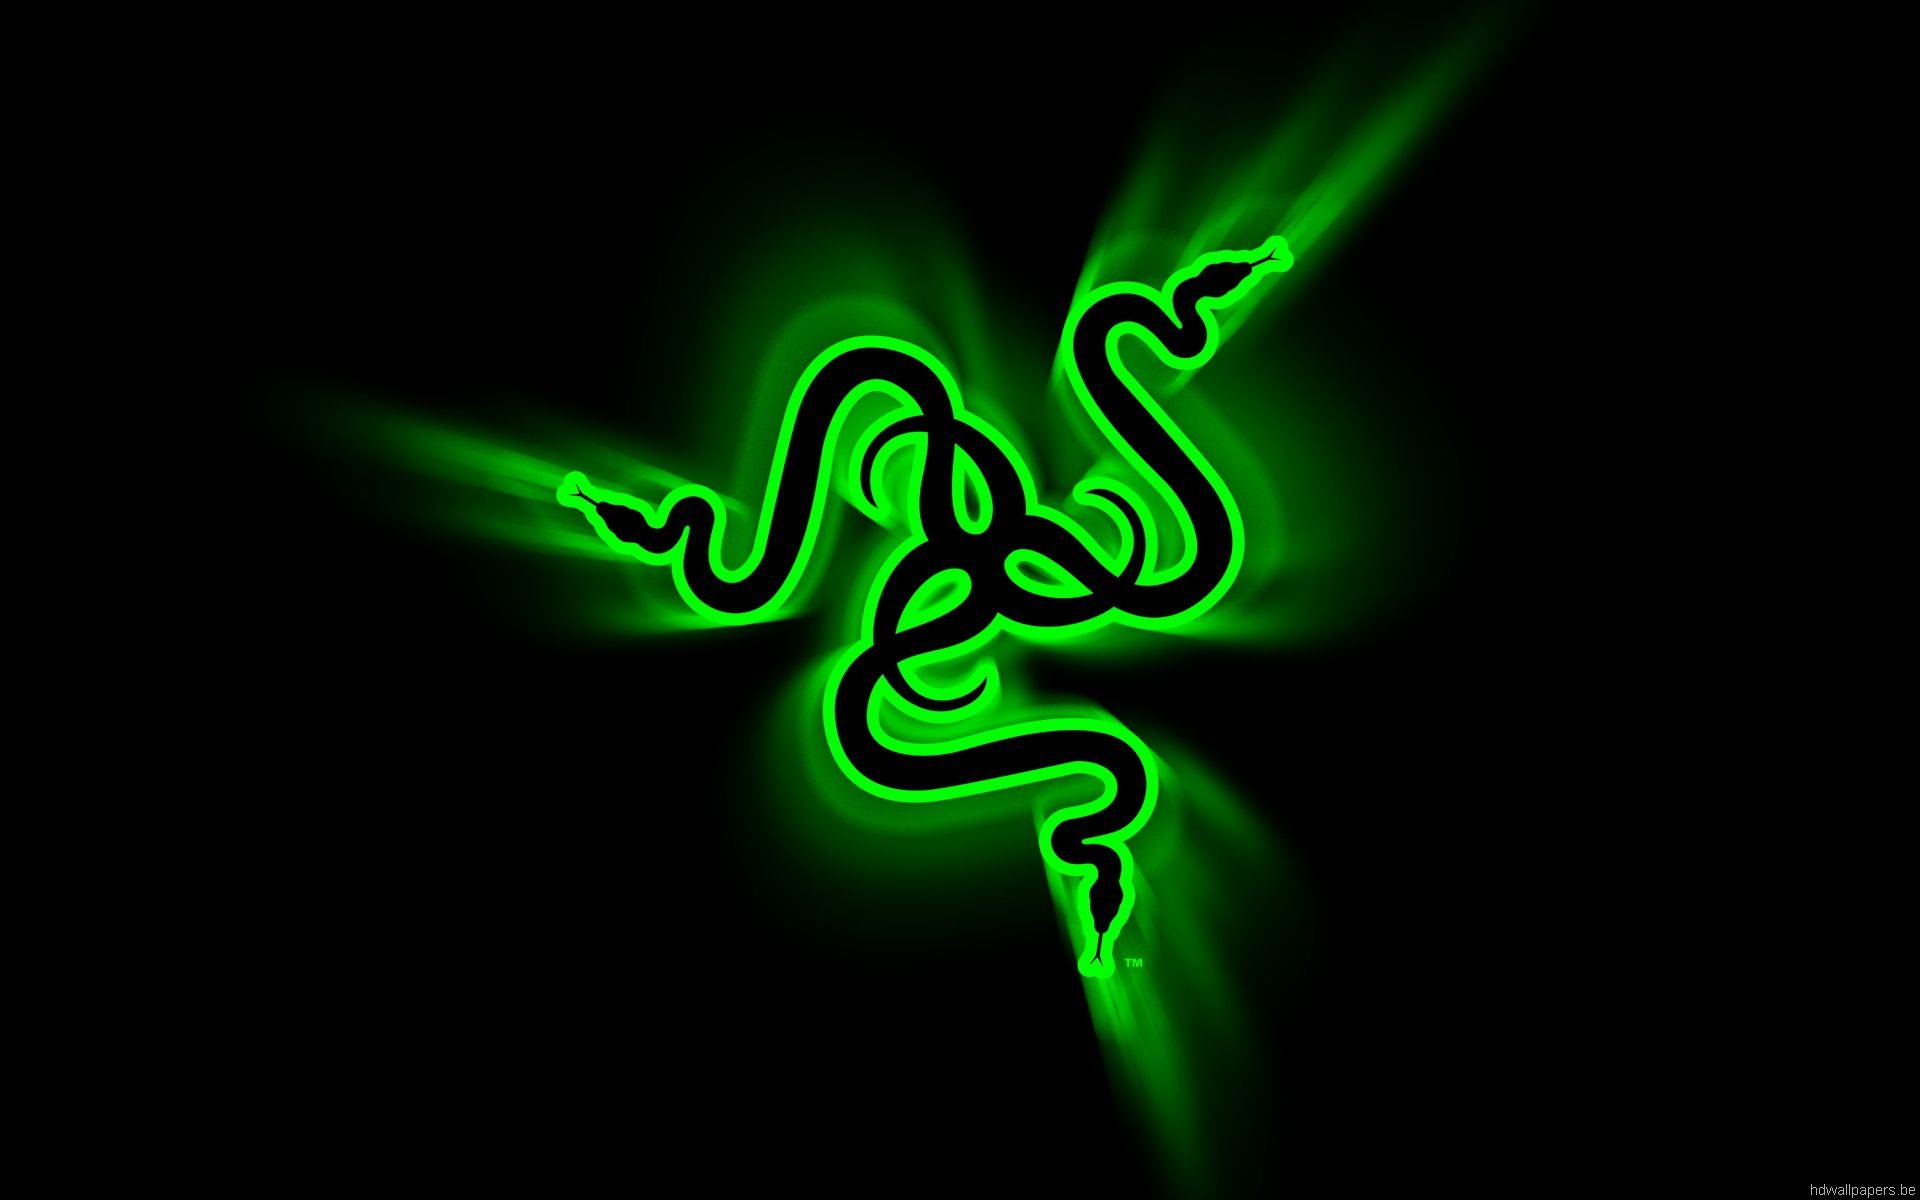 Black wallpaper with green snakes wallpaper and image, picture, photo